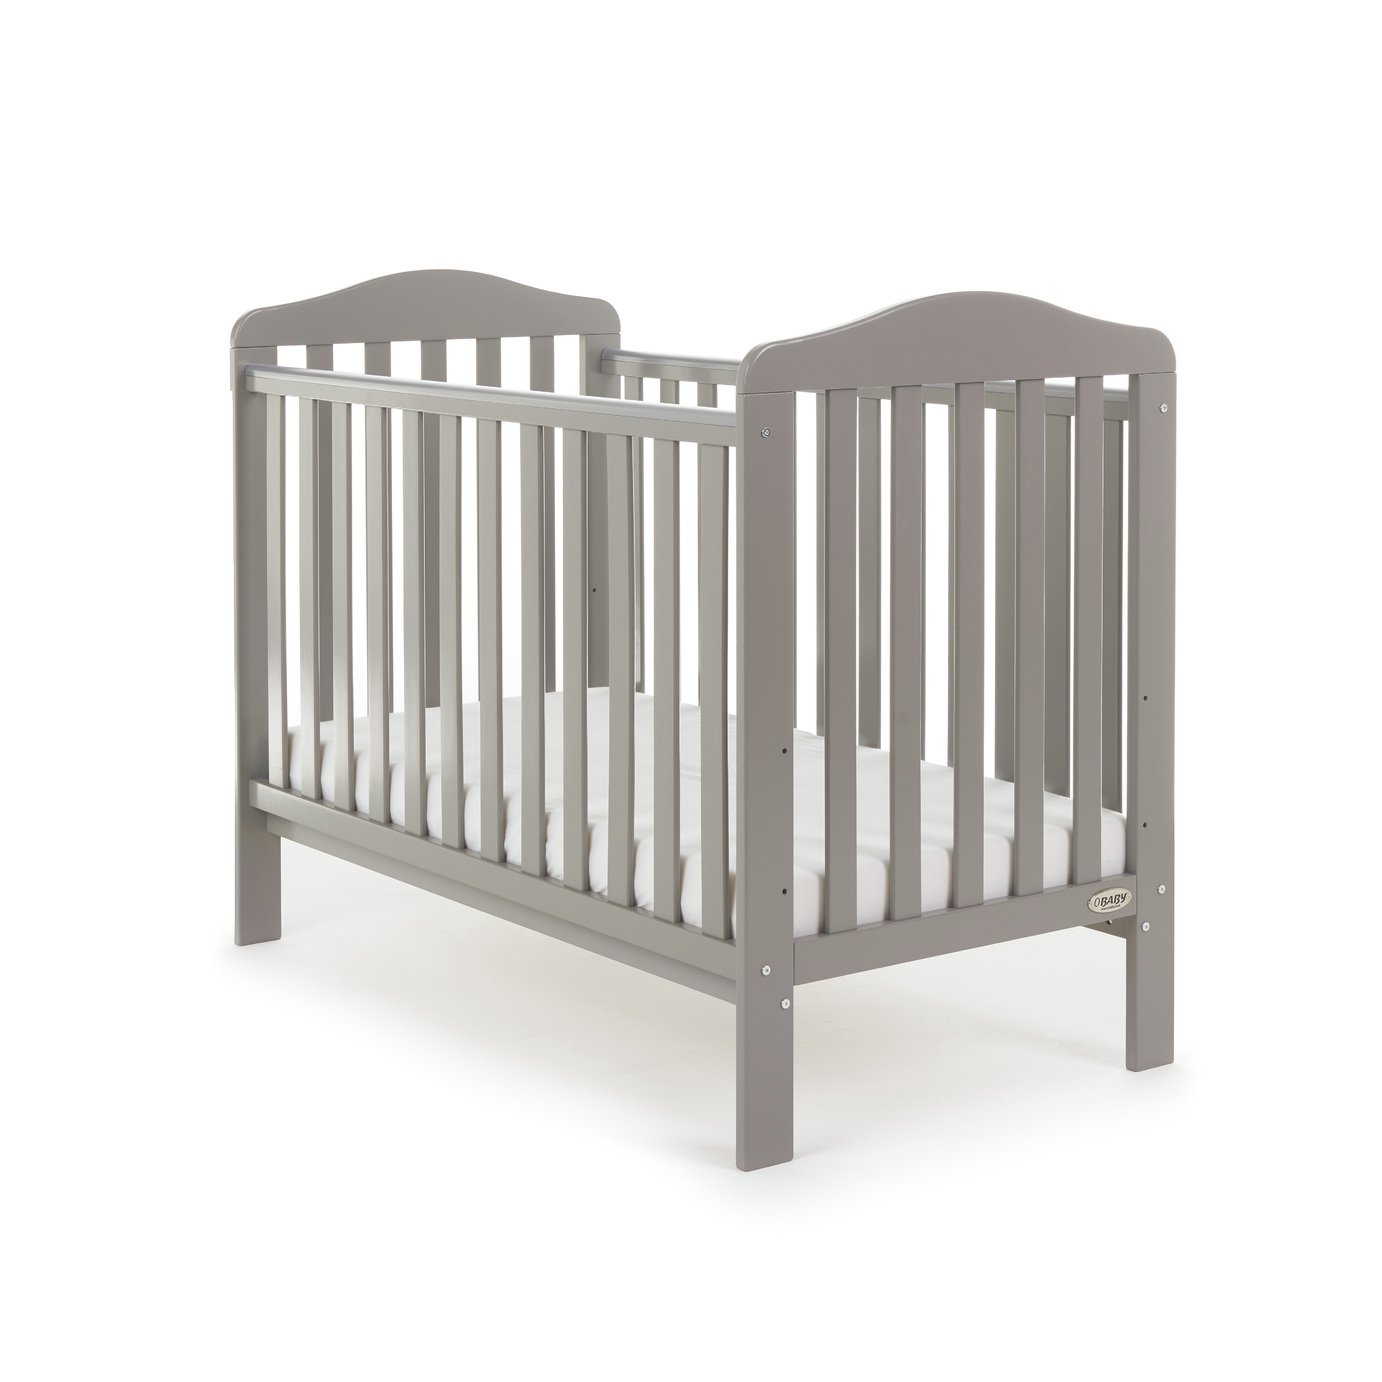 Obaby Ludlow Baby Cot Review